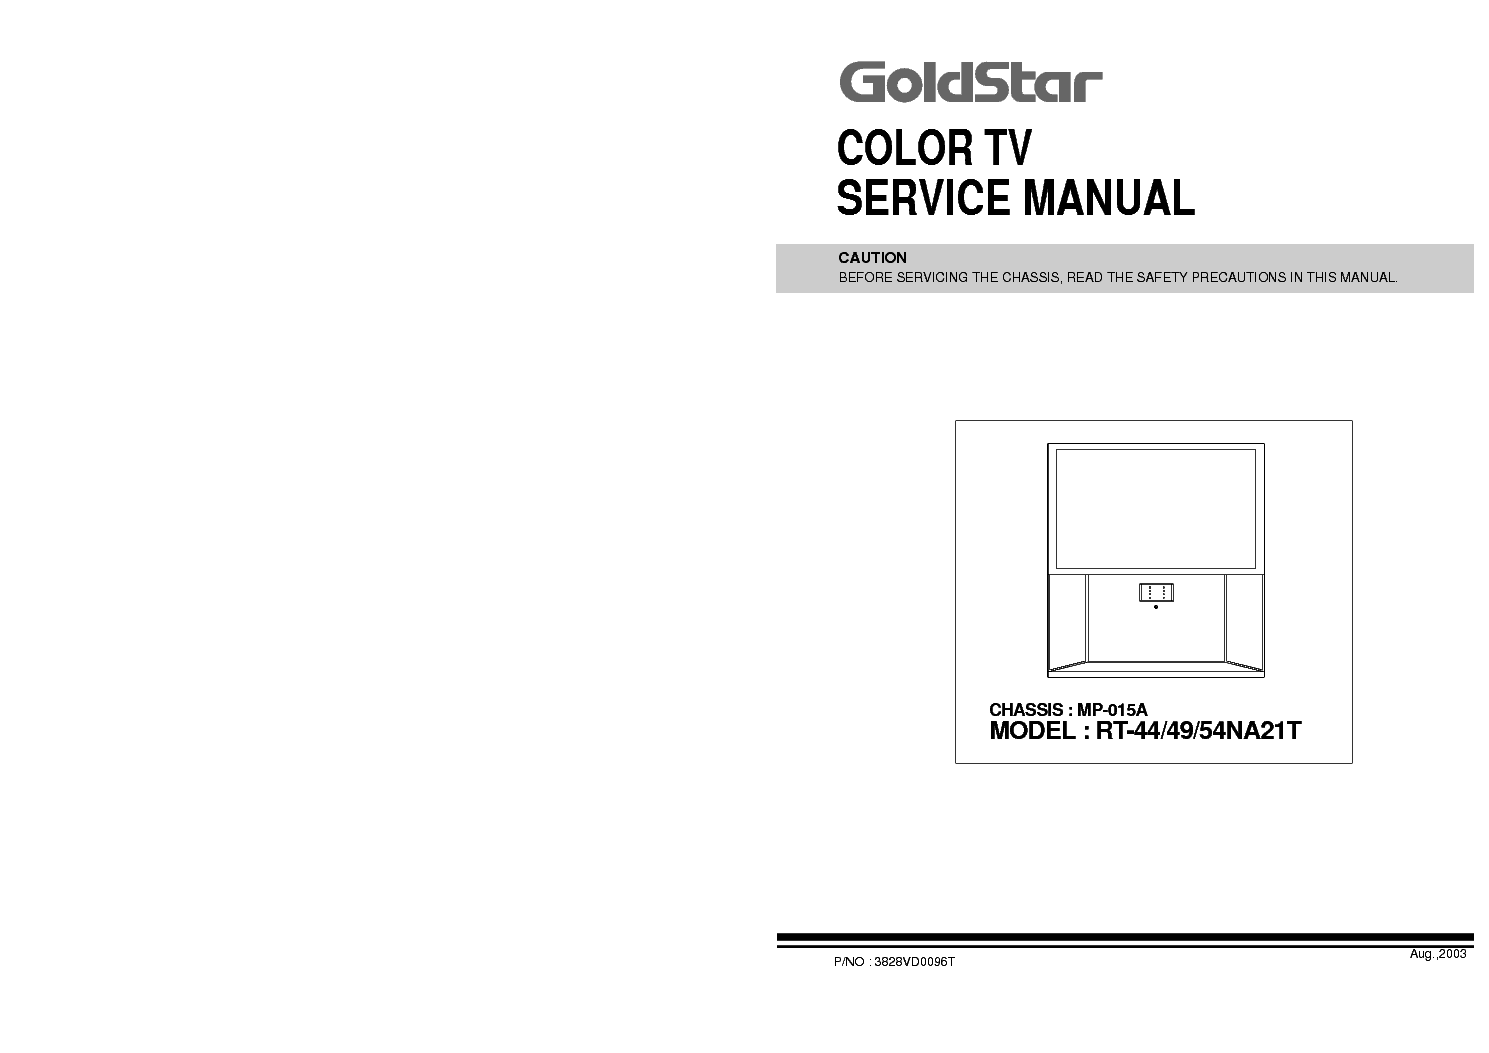 LG GOLDSTAR RT-44,49,54NA21T CHASSIS MP-015A service manual (2nd page)